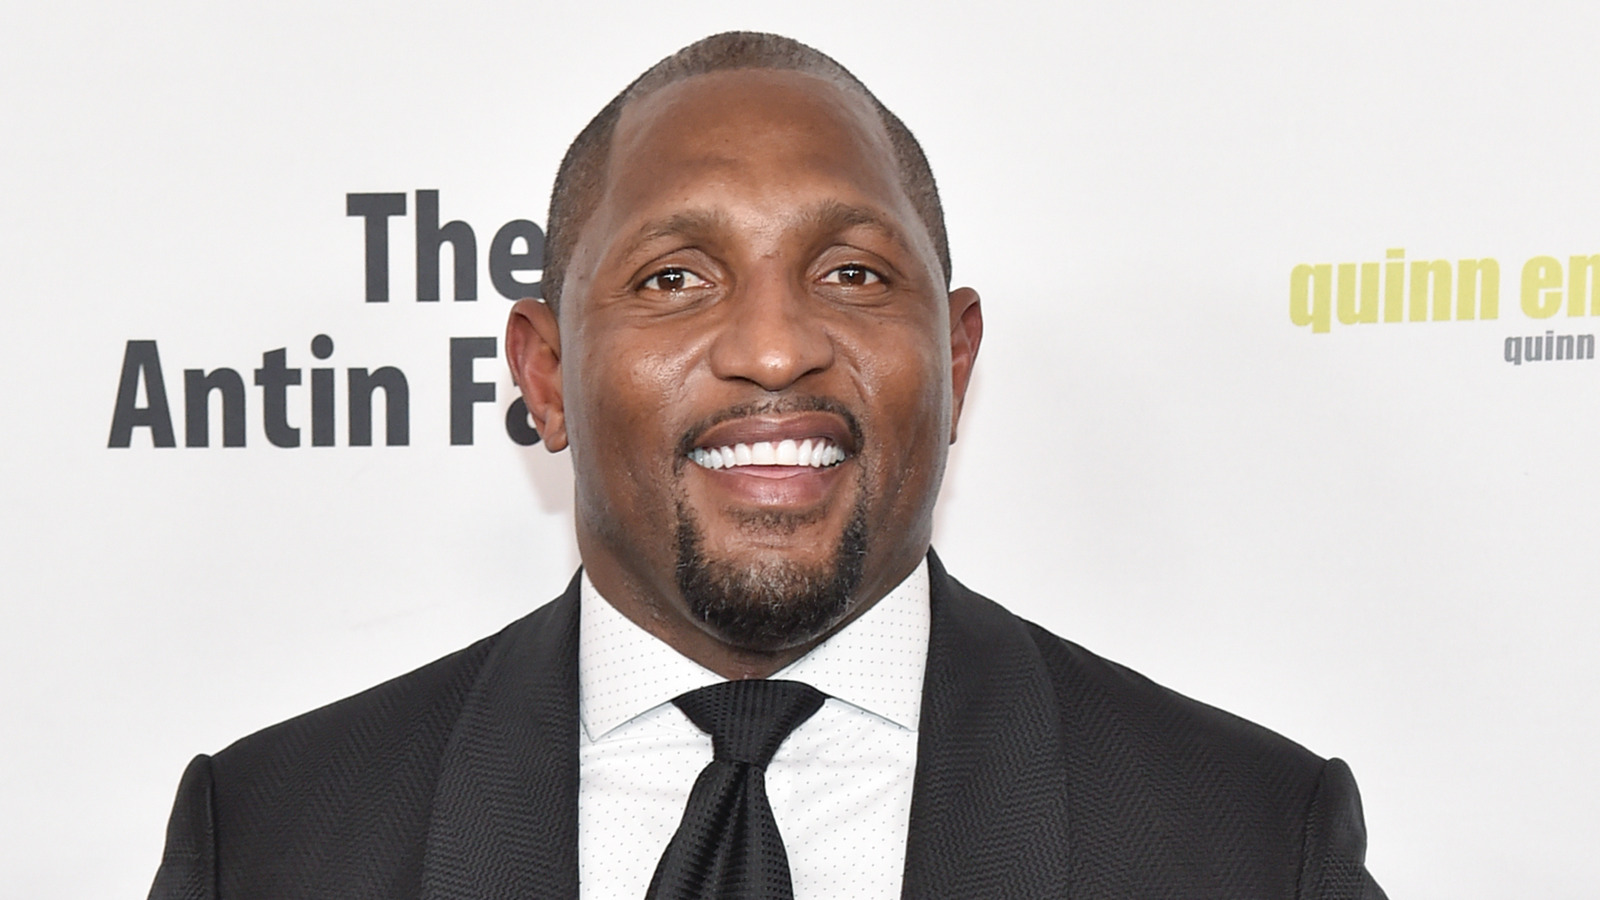 Ray Lewis III, son of Baltimore Ravens legend, died of suspected overdose, NFL